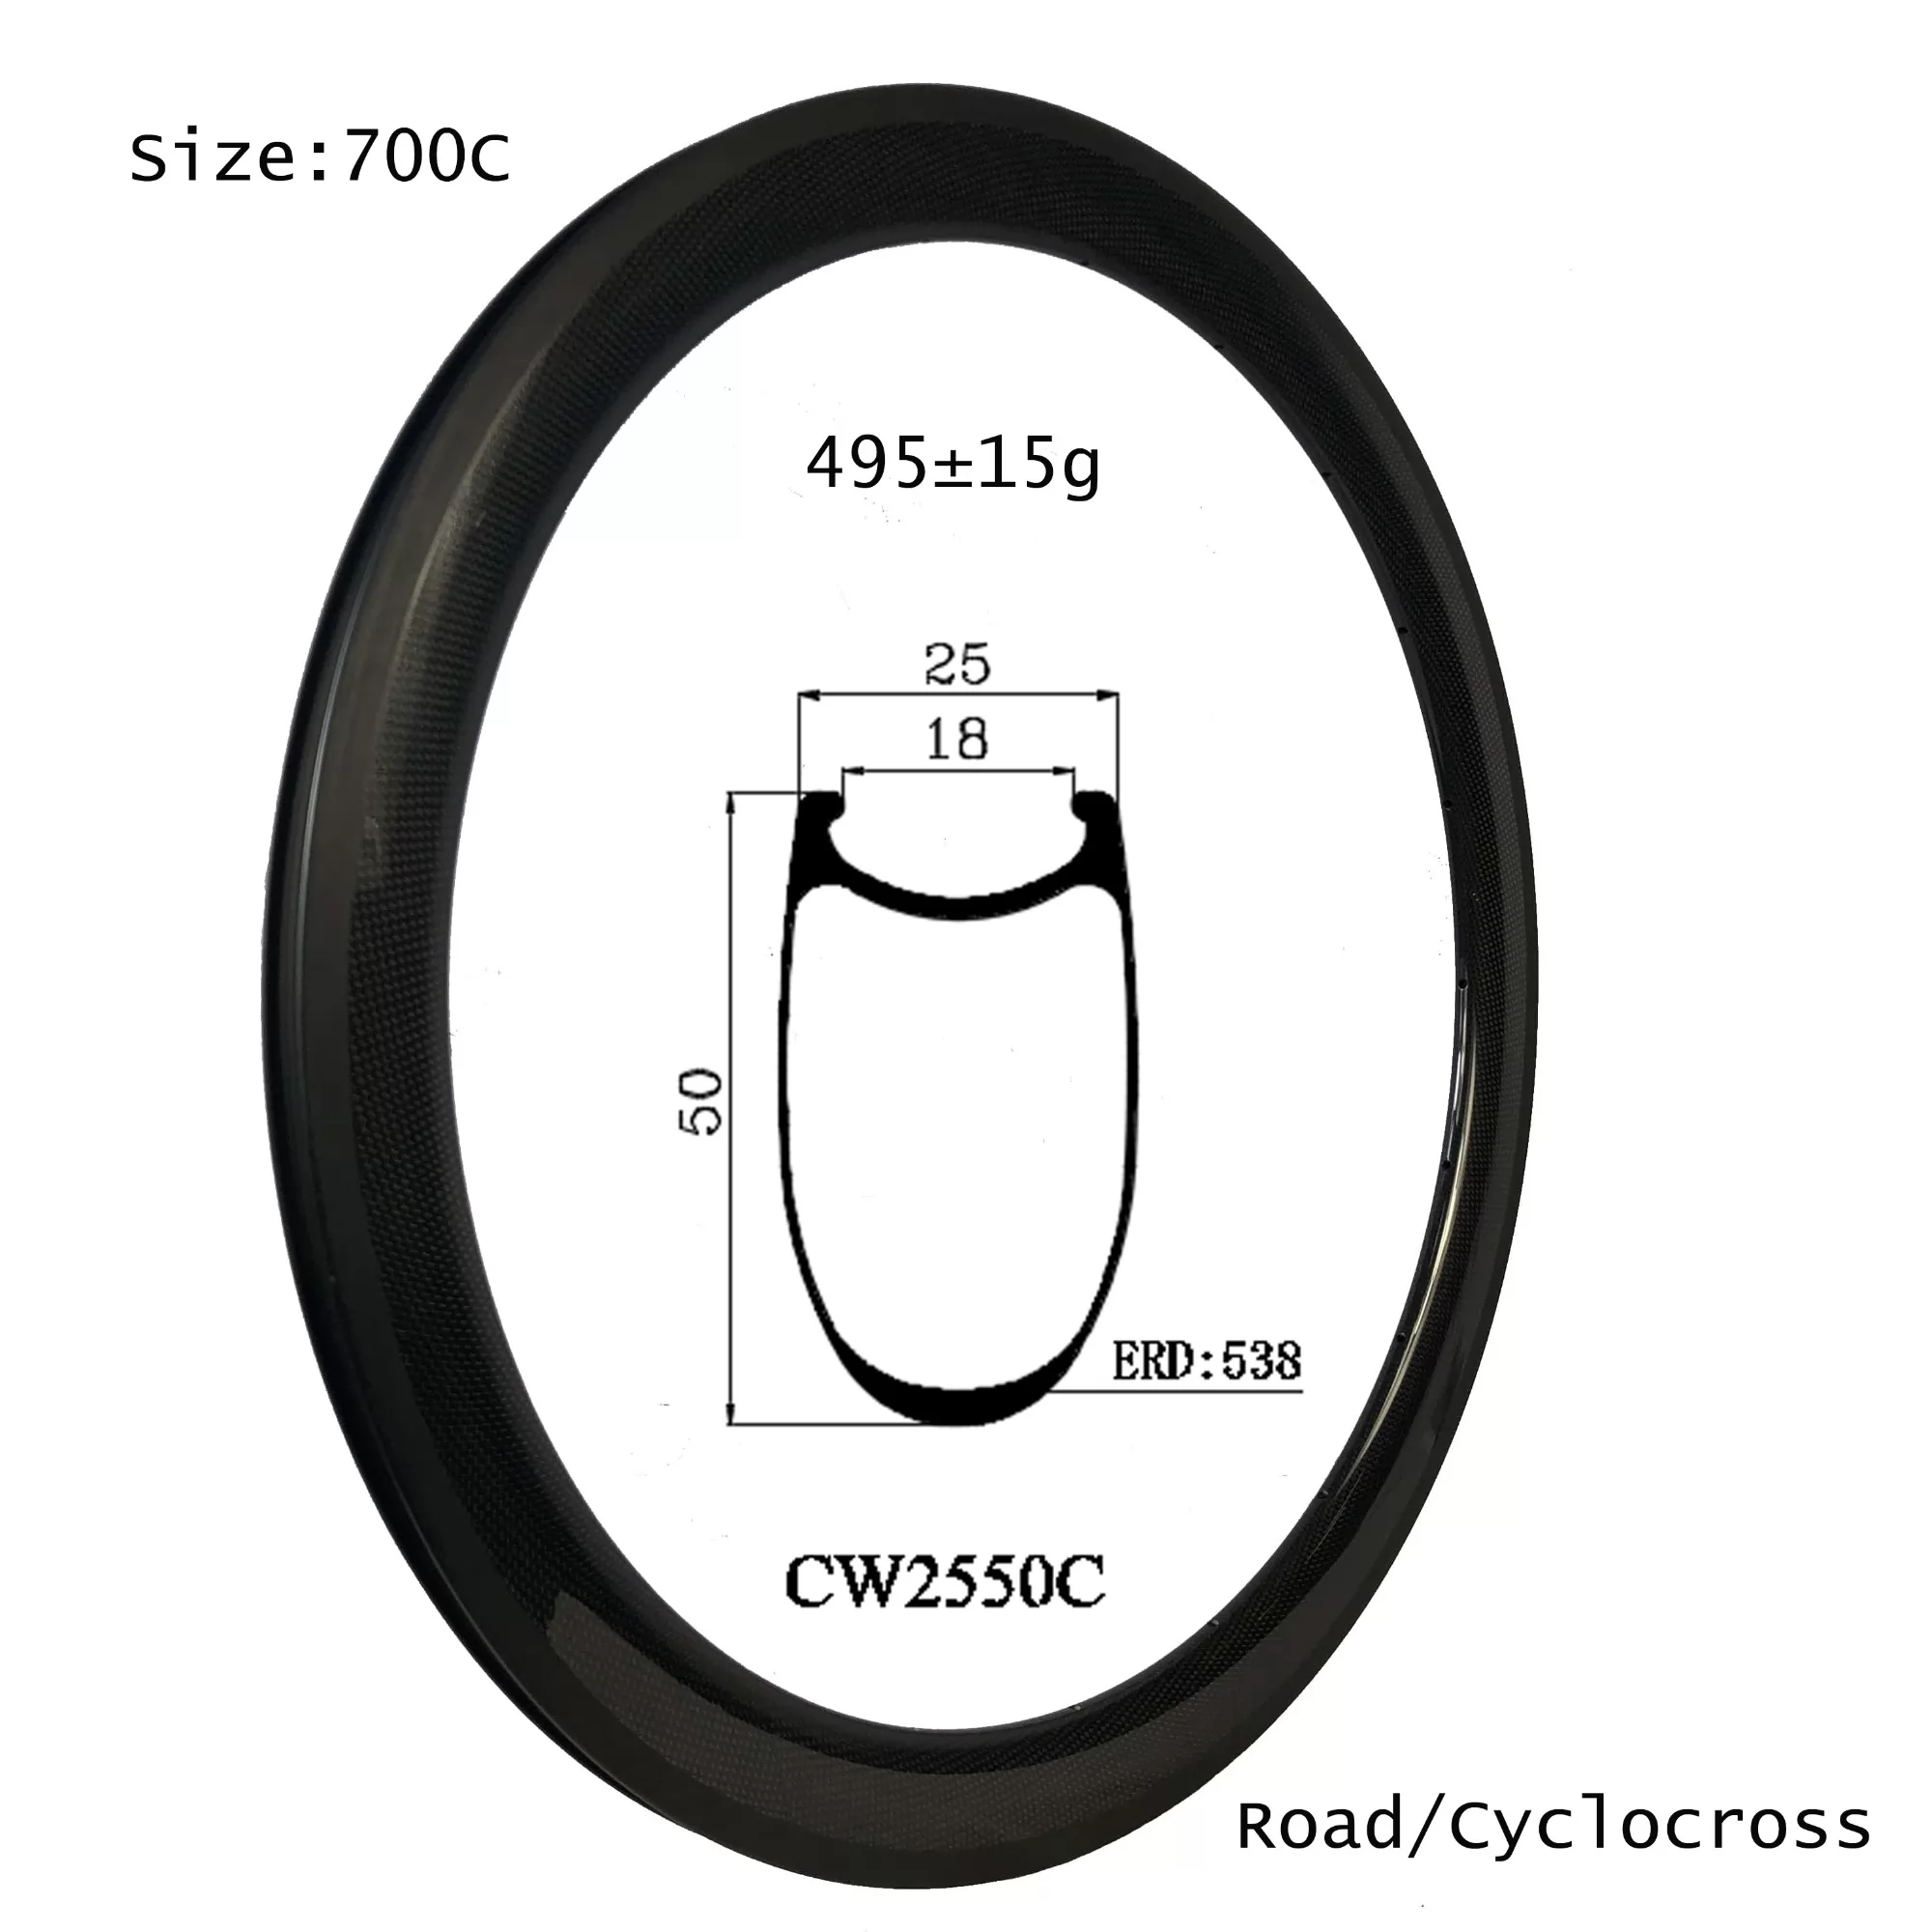 |CW25-50T/C/CT| carbon road bike rims full size tyres option 25mm width 50mm deep tubular/clincher/tubeless tyres rim brake/disc brake available